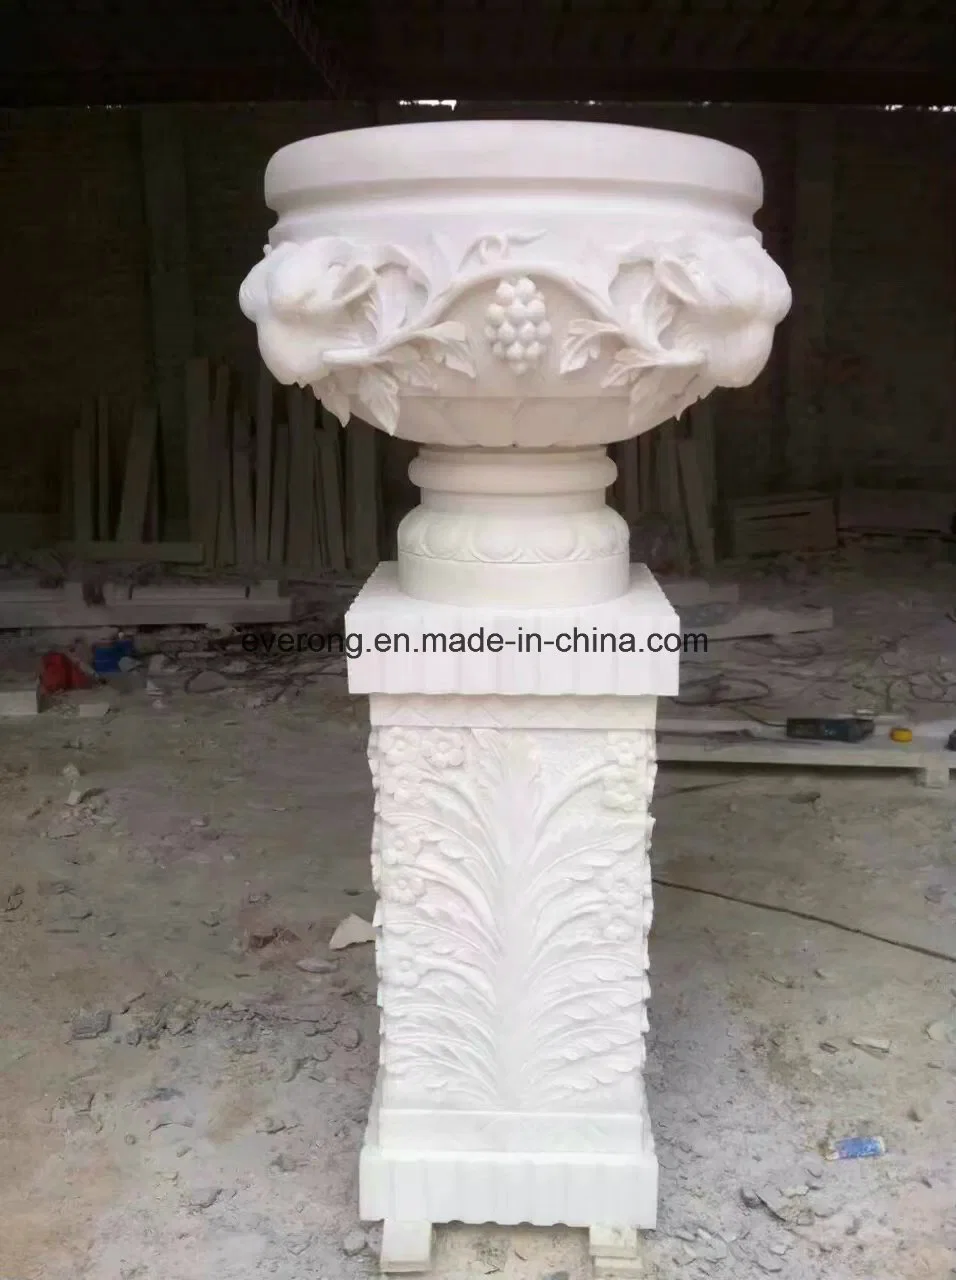 Stand Large Stone Marble Flower Pot Carving with Column Pillar Design for Outdoor Garden Deorative